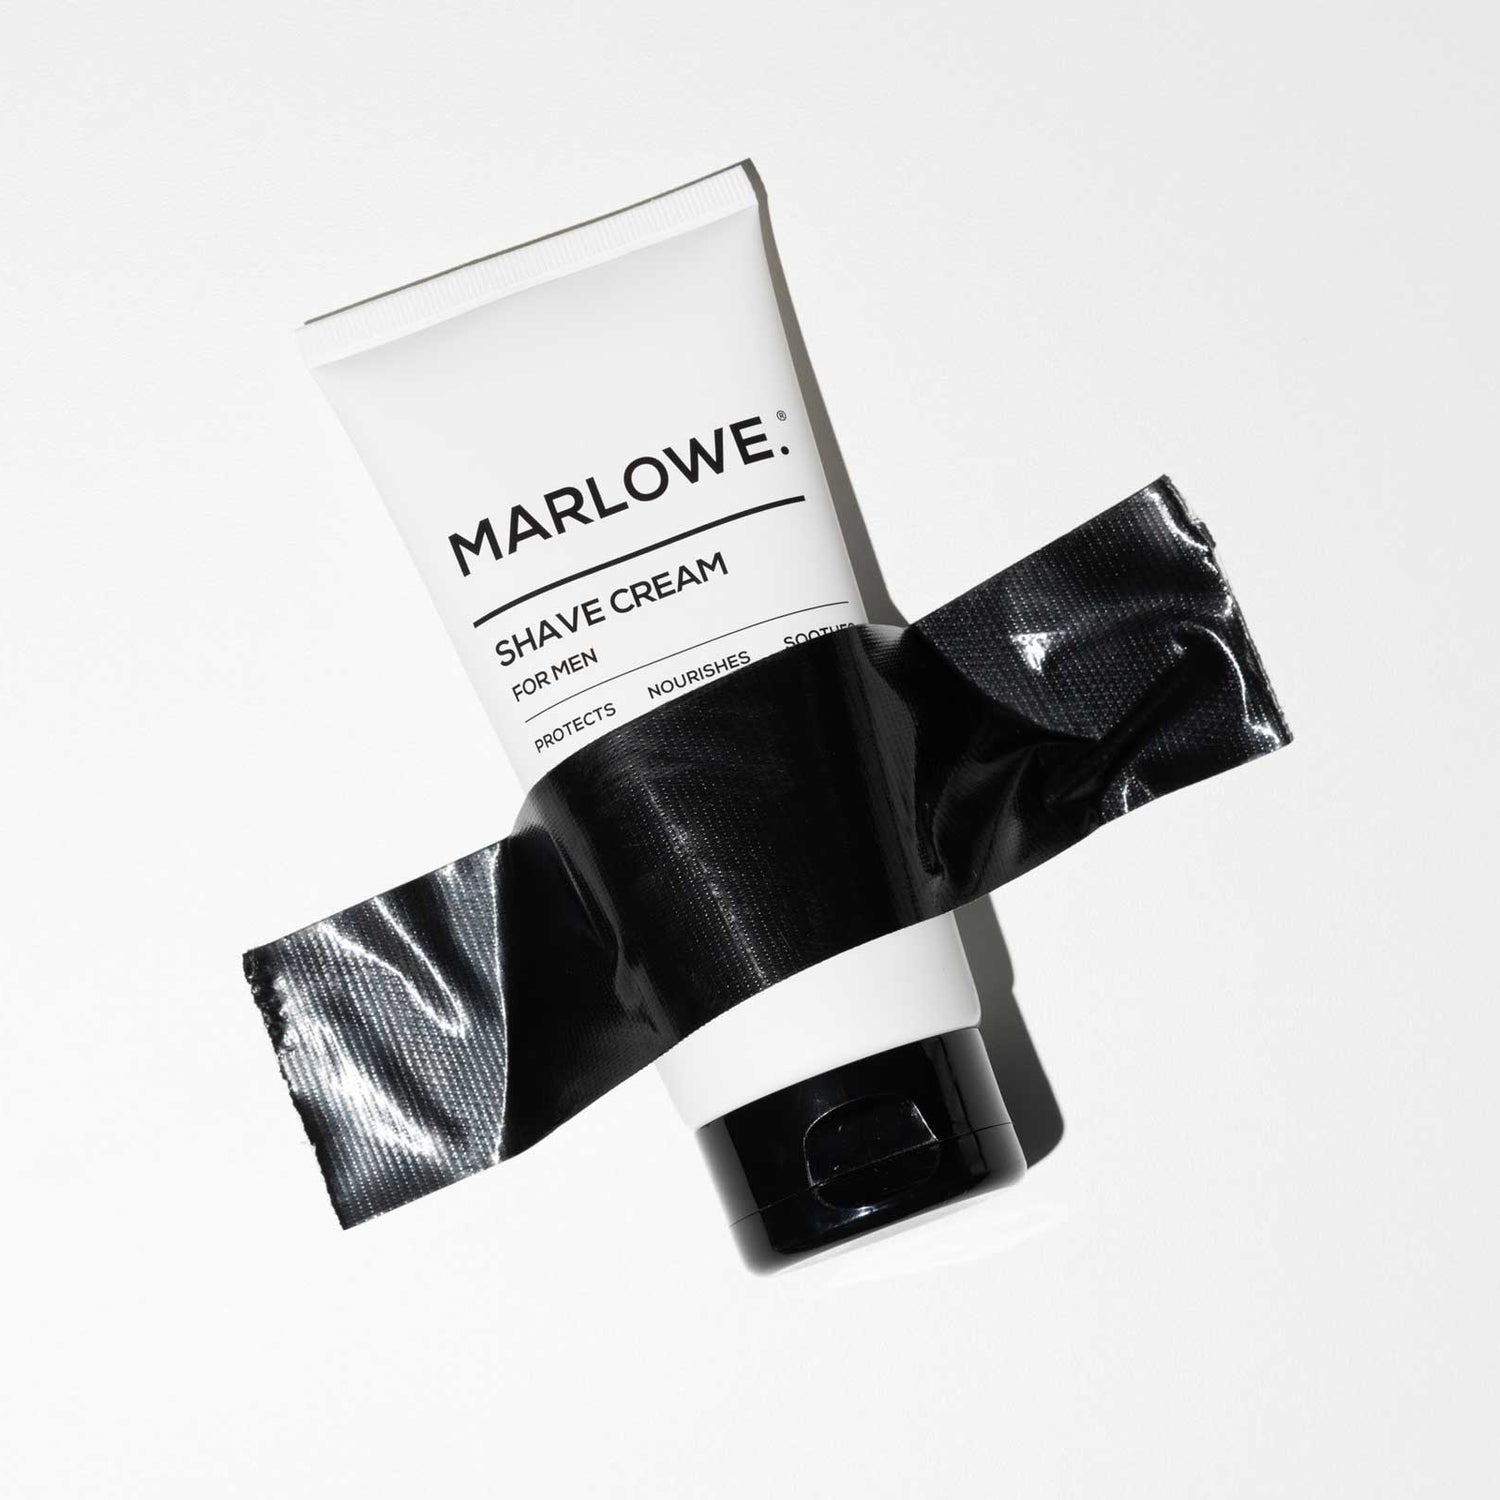 MARLOWE. Shave Cream taped to wall with black tape